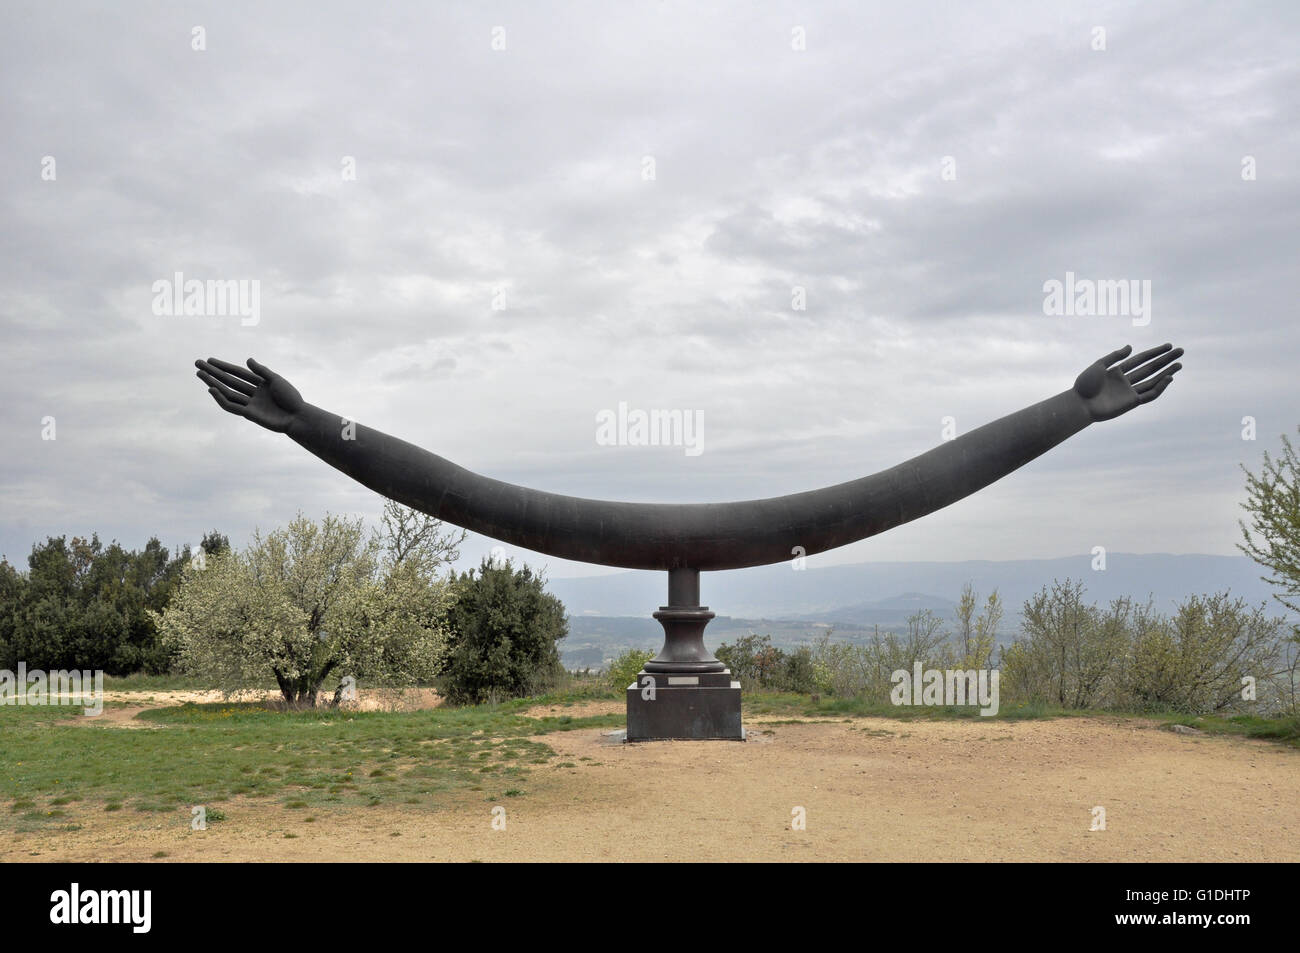 A statue of two arms at the remains of the chateau of Marquis de Sade, Lacoste, Vaucluse, Provence, France. Stock Photo